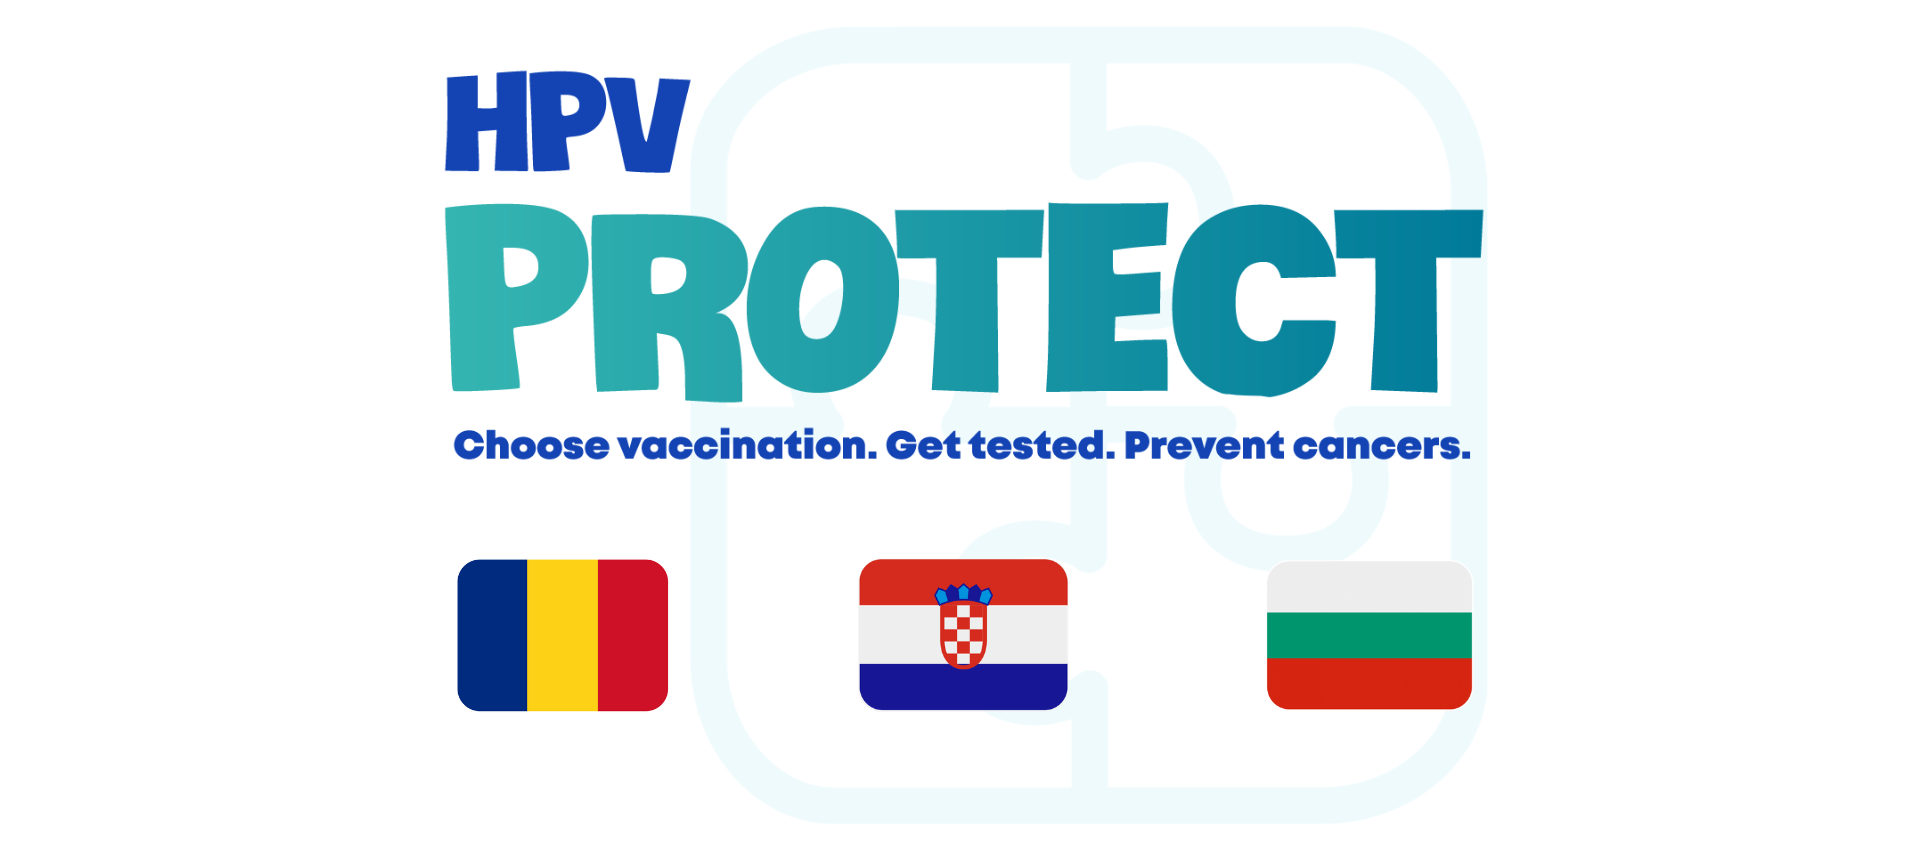 hpv-protect-choose-vaccination-get-tested-prevent-cancers.png